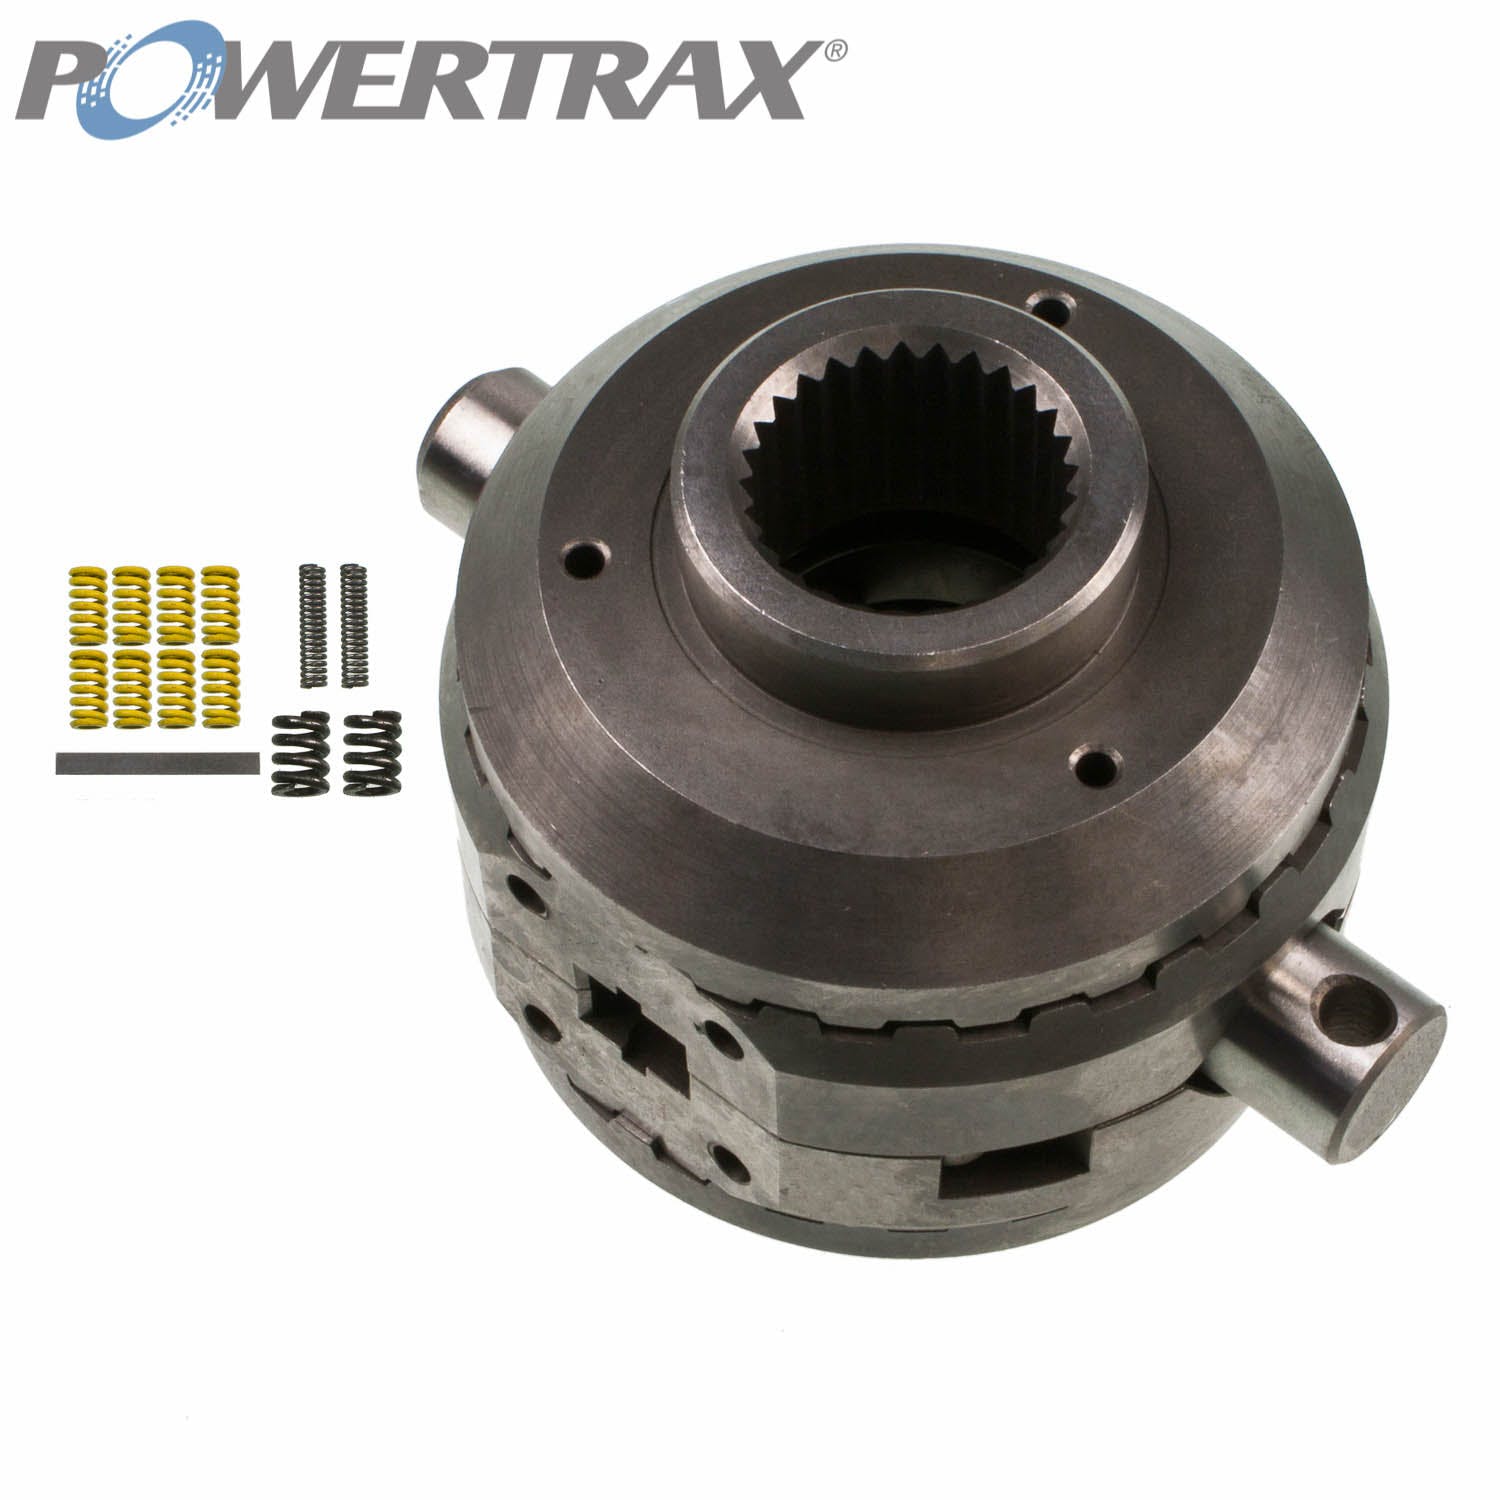 PowerTrax 9206882807 No-Slip Traction System